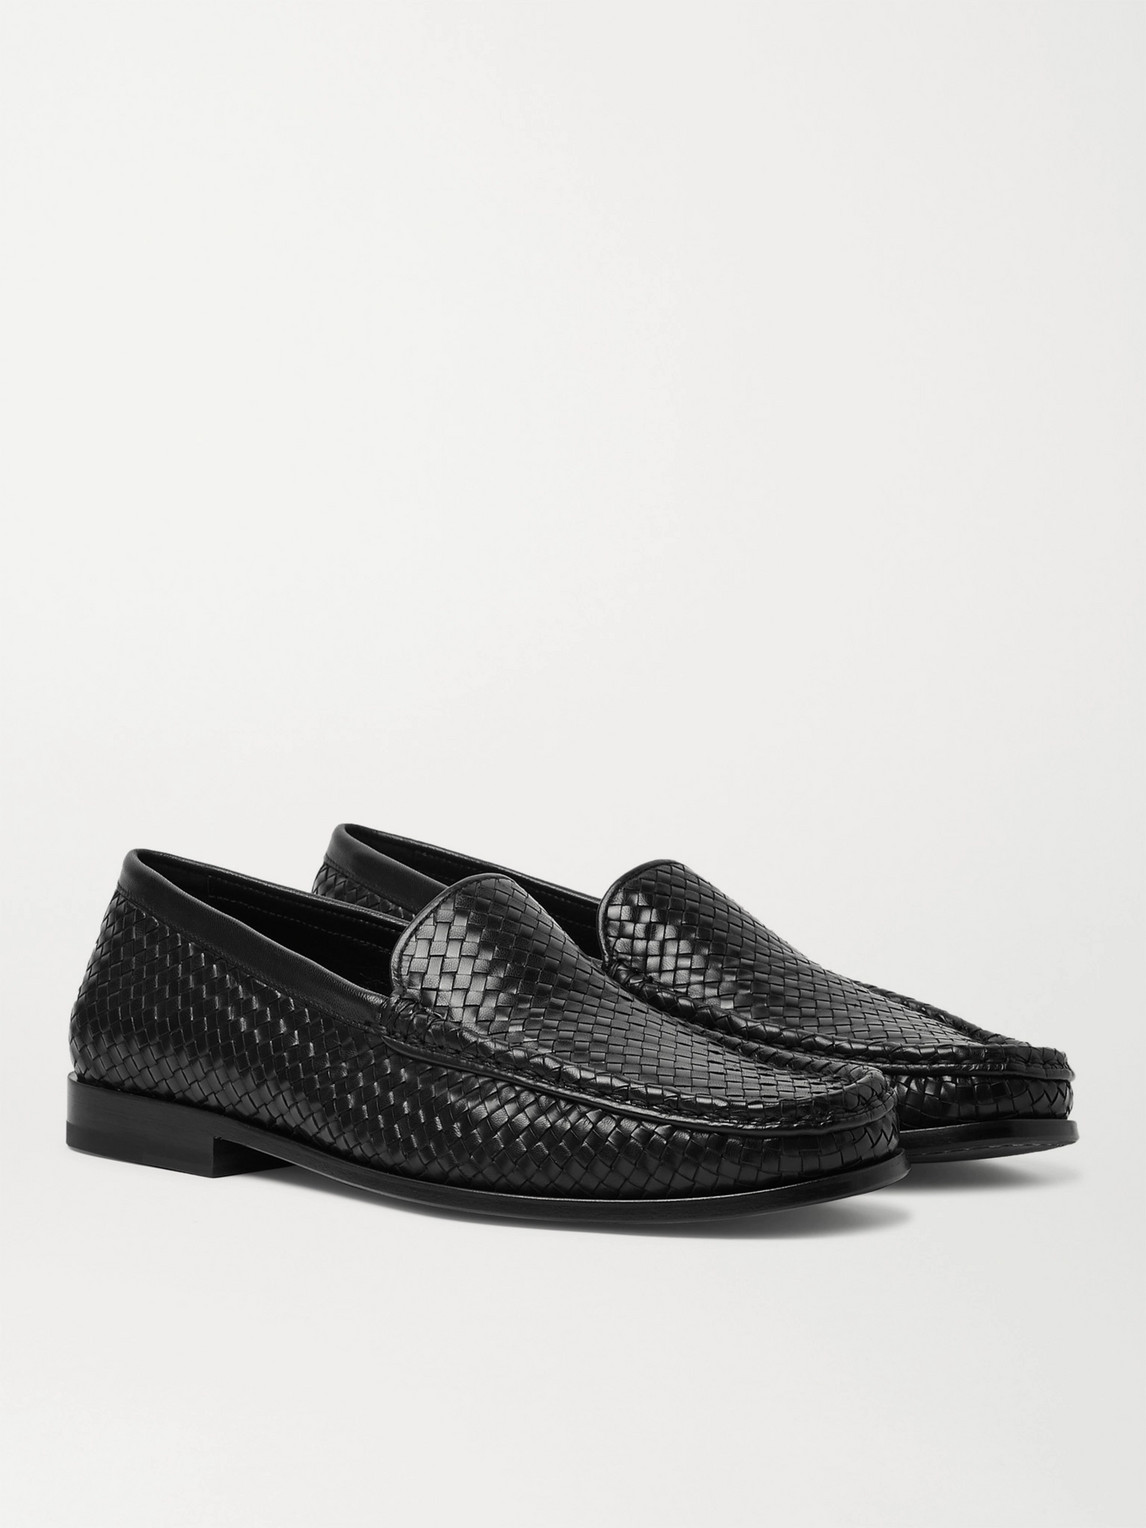 Jm Weston Collapsible-heel Woven Leather Loafers In Black